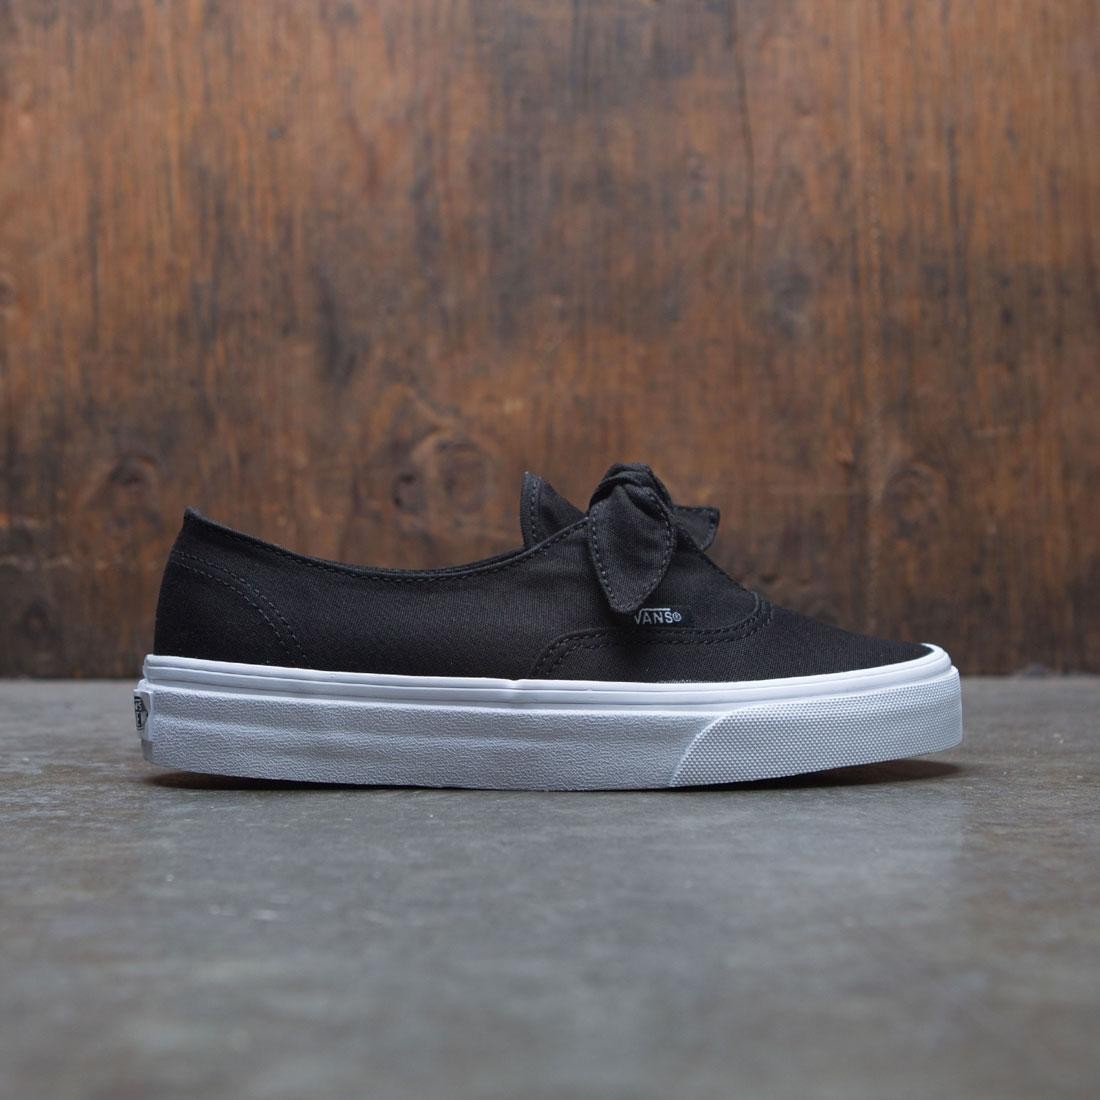 vans authentic knotted